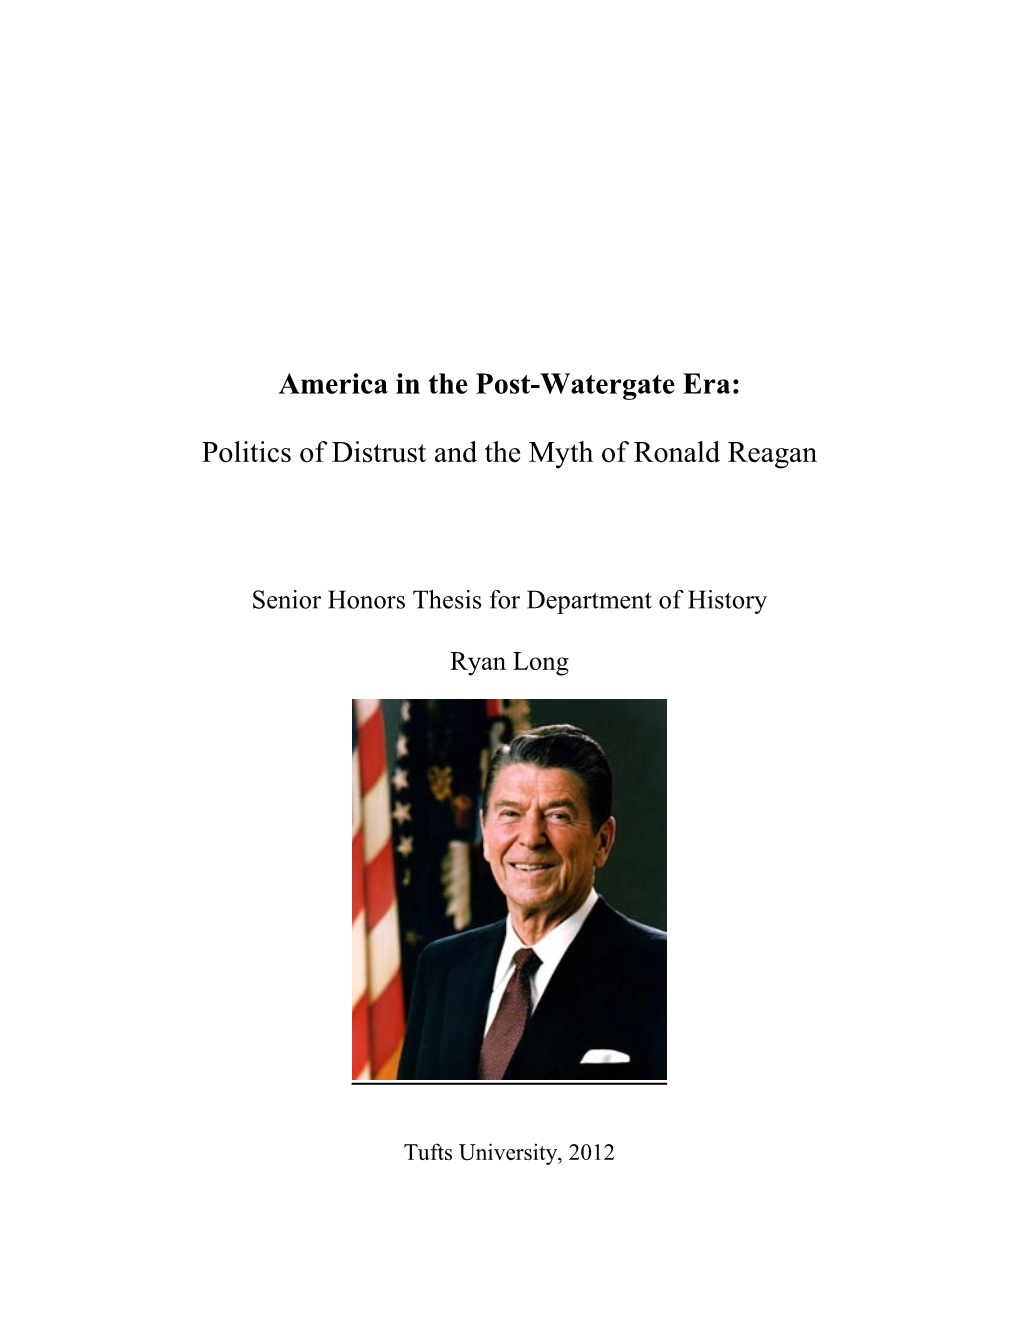 America in the Post-Watergate Era: Politics of Distrust and the Myth Of